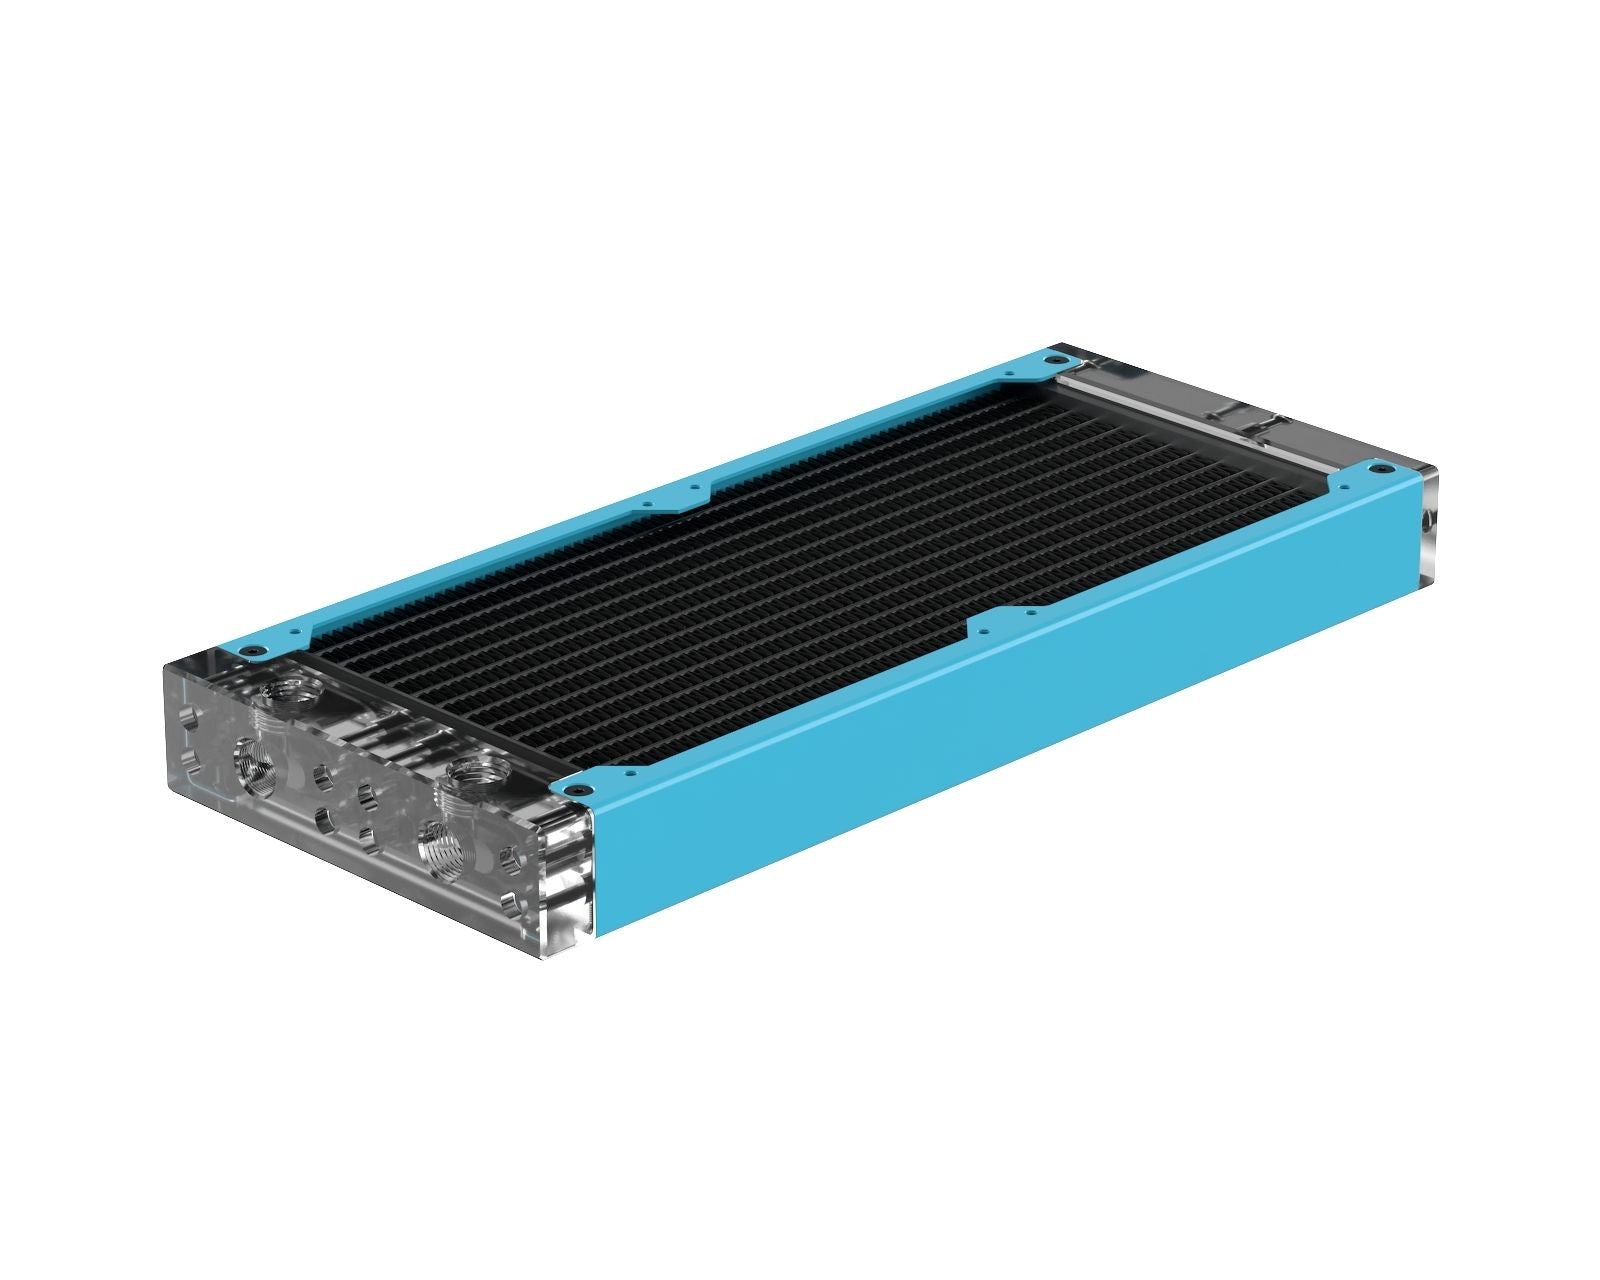 PrimoChill 240SL (30mm) EXIMO Modular Radiator, Clear Acrylic, 2x120mm, Dual Fan (R-SL-A24) Available in 20+ Colors, Assembled in USA and Custom Watercooling Loop Ready - Sky Blue